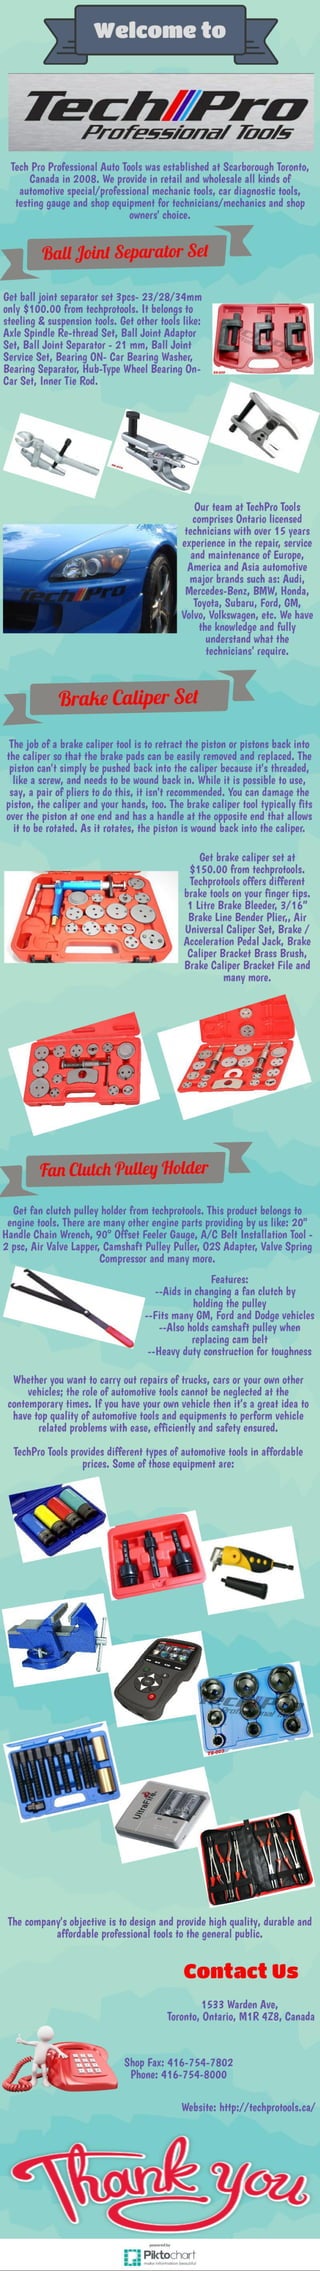 Availability of fan clutch pulley holder at tech pro tools